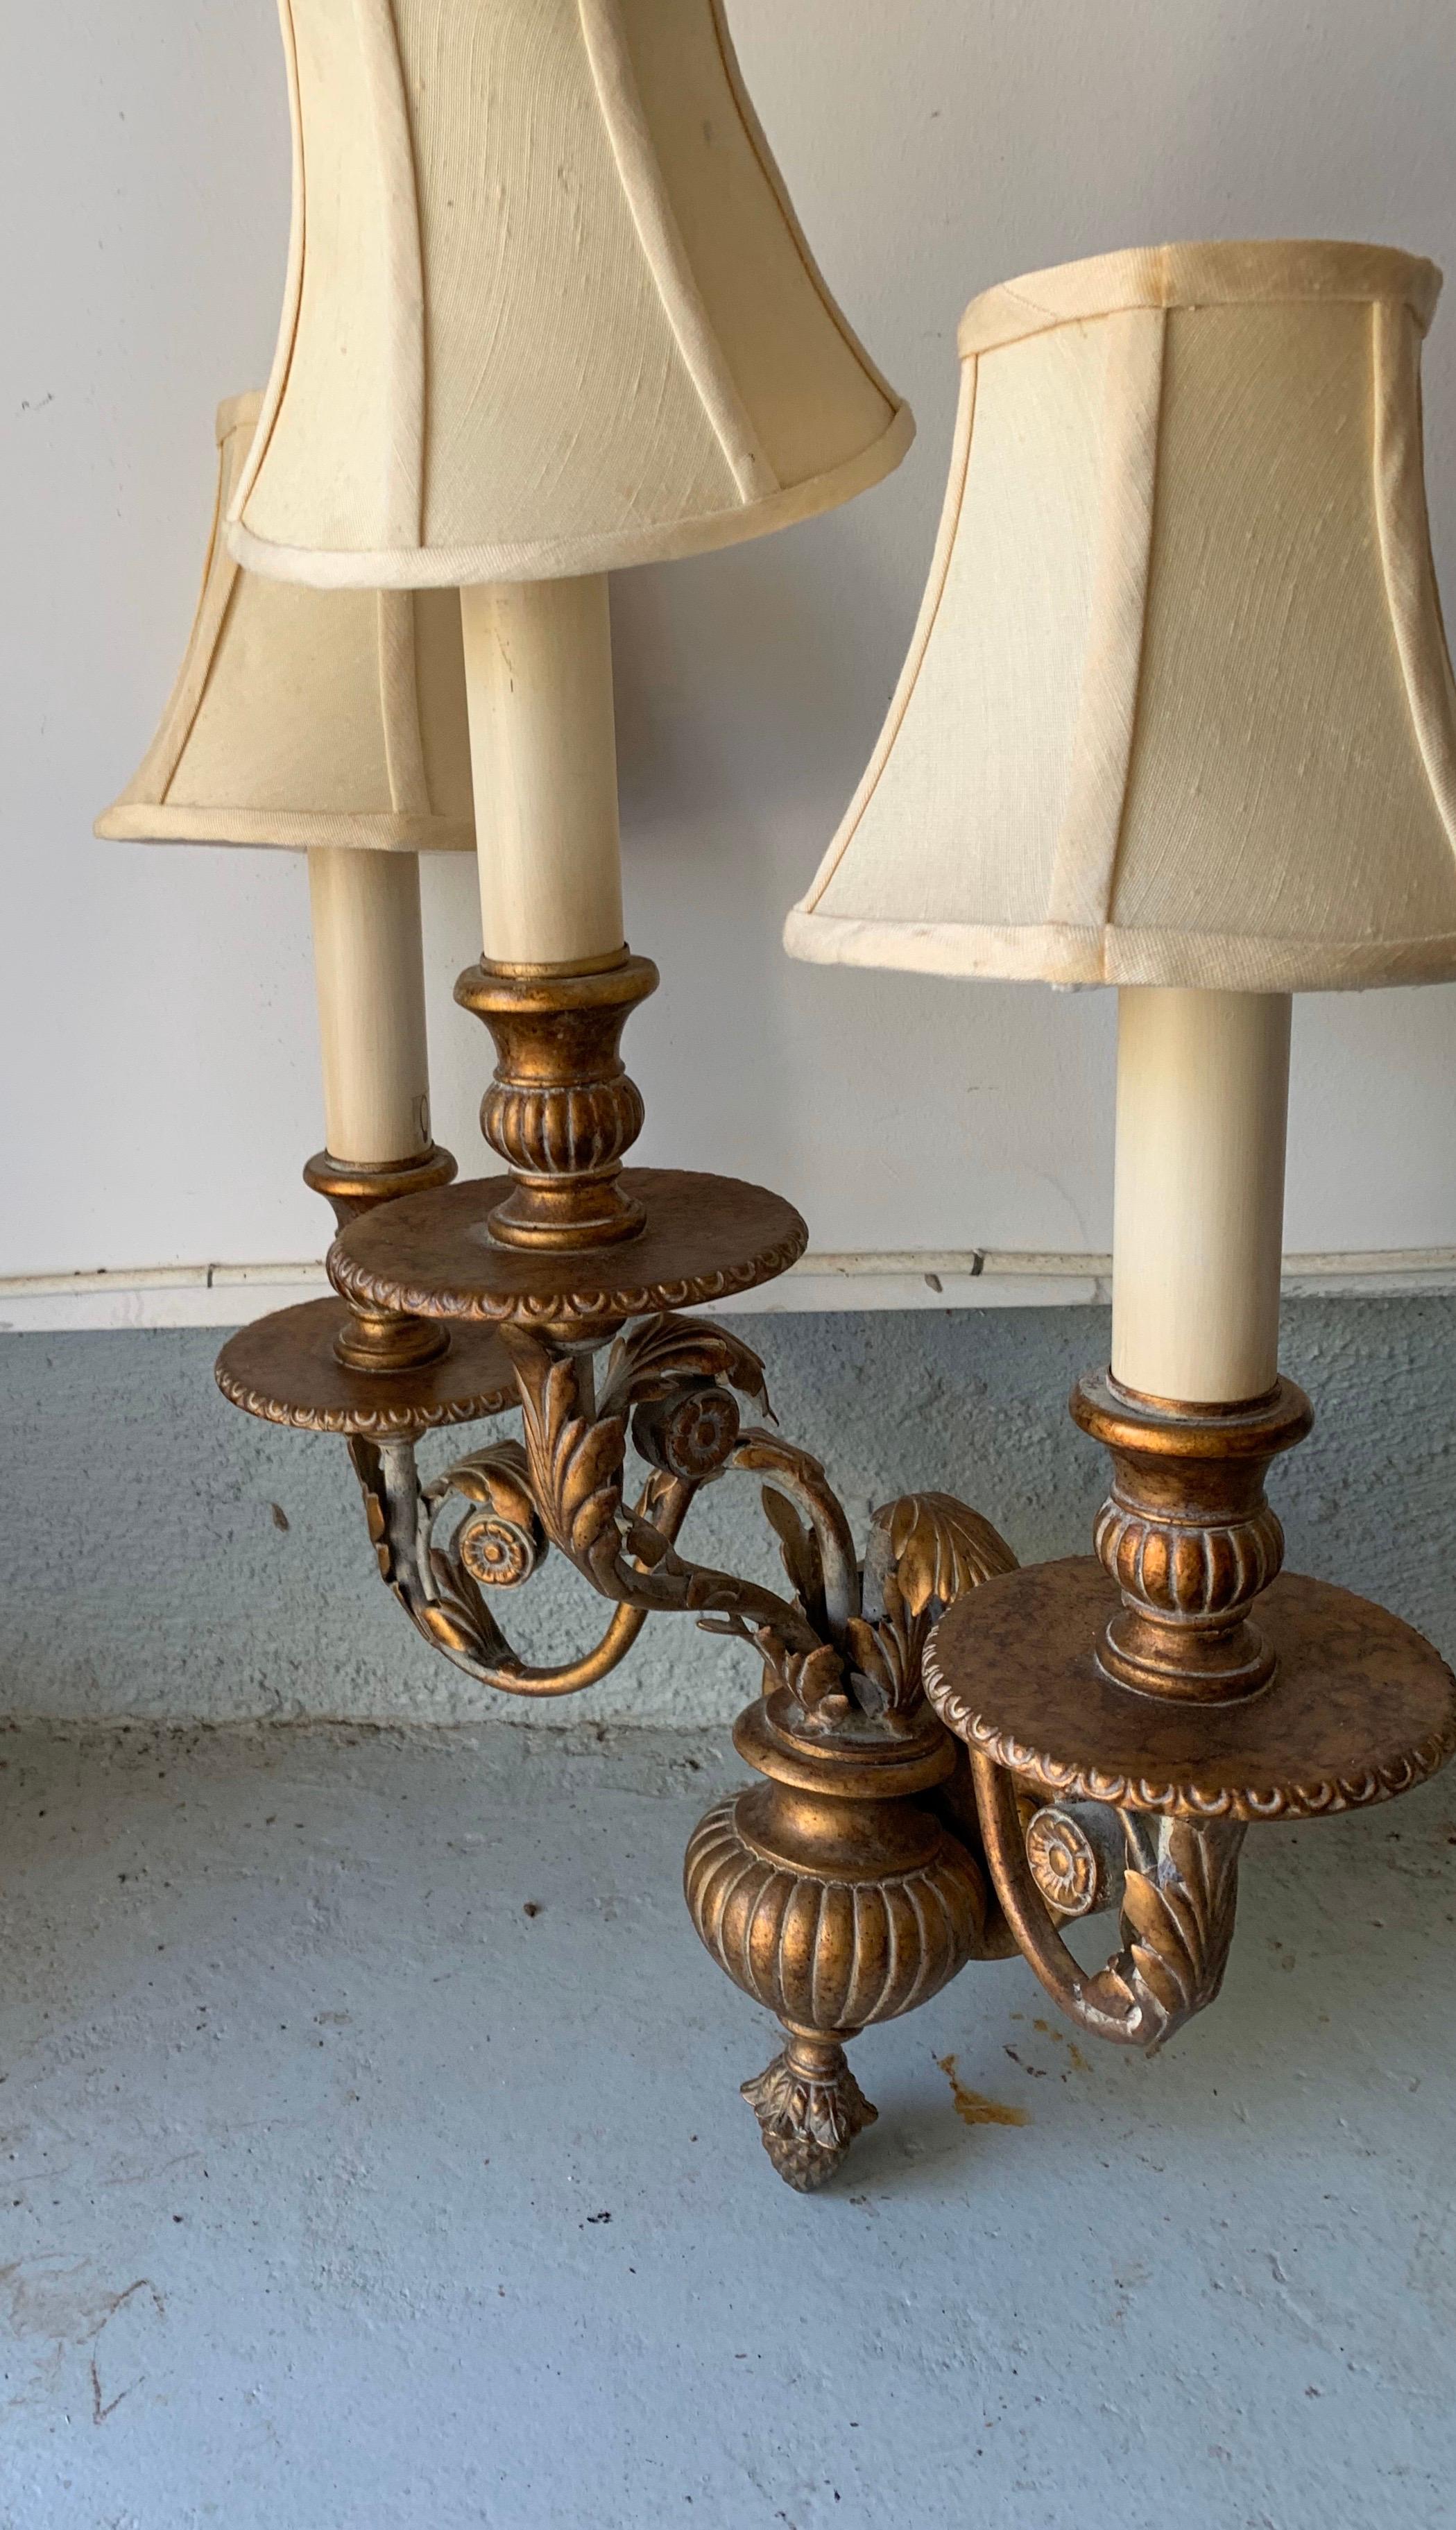 A pair of three-arm brass sconces made by the Fine Art Lamps company in Miami Lakes, FL, circa 1990.

UL listed.

Includes silk shades.

Dimnesions:
Sconces, 24 inches H x 16 inches w x 9 inches D x 5 inches wall plate
Shades, 3.25 inches top W x